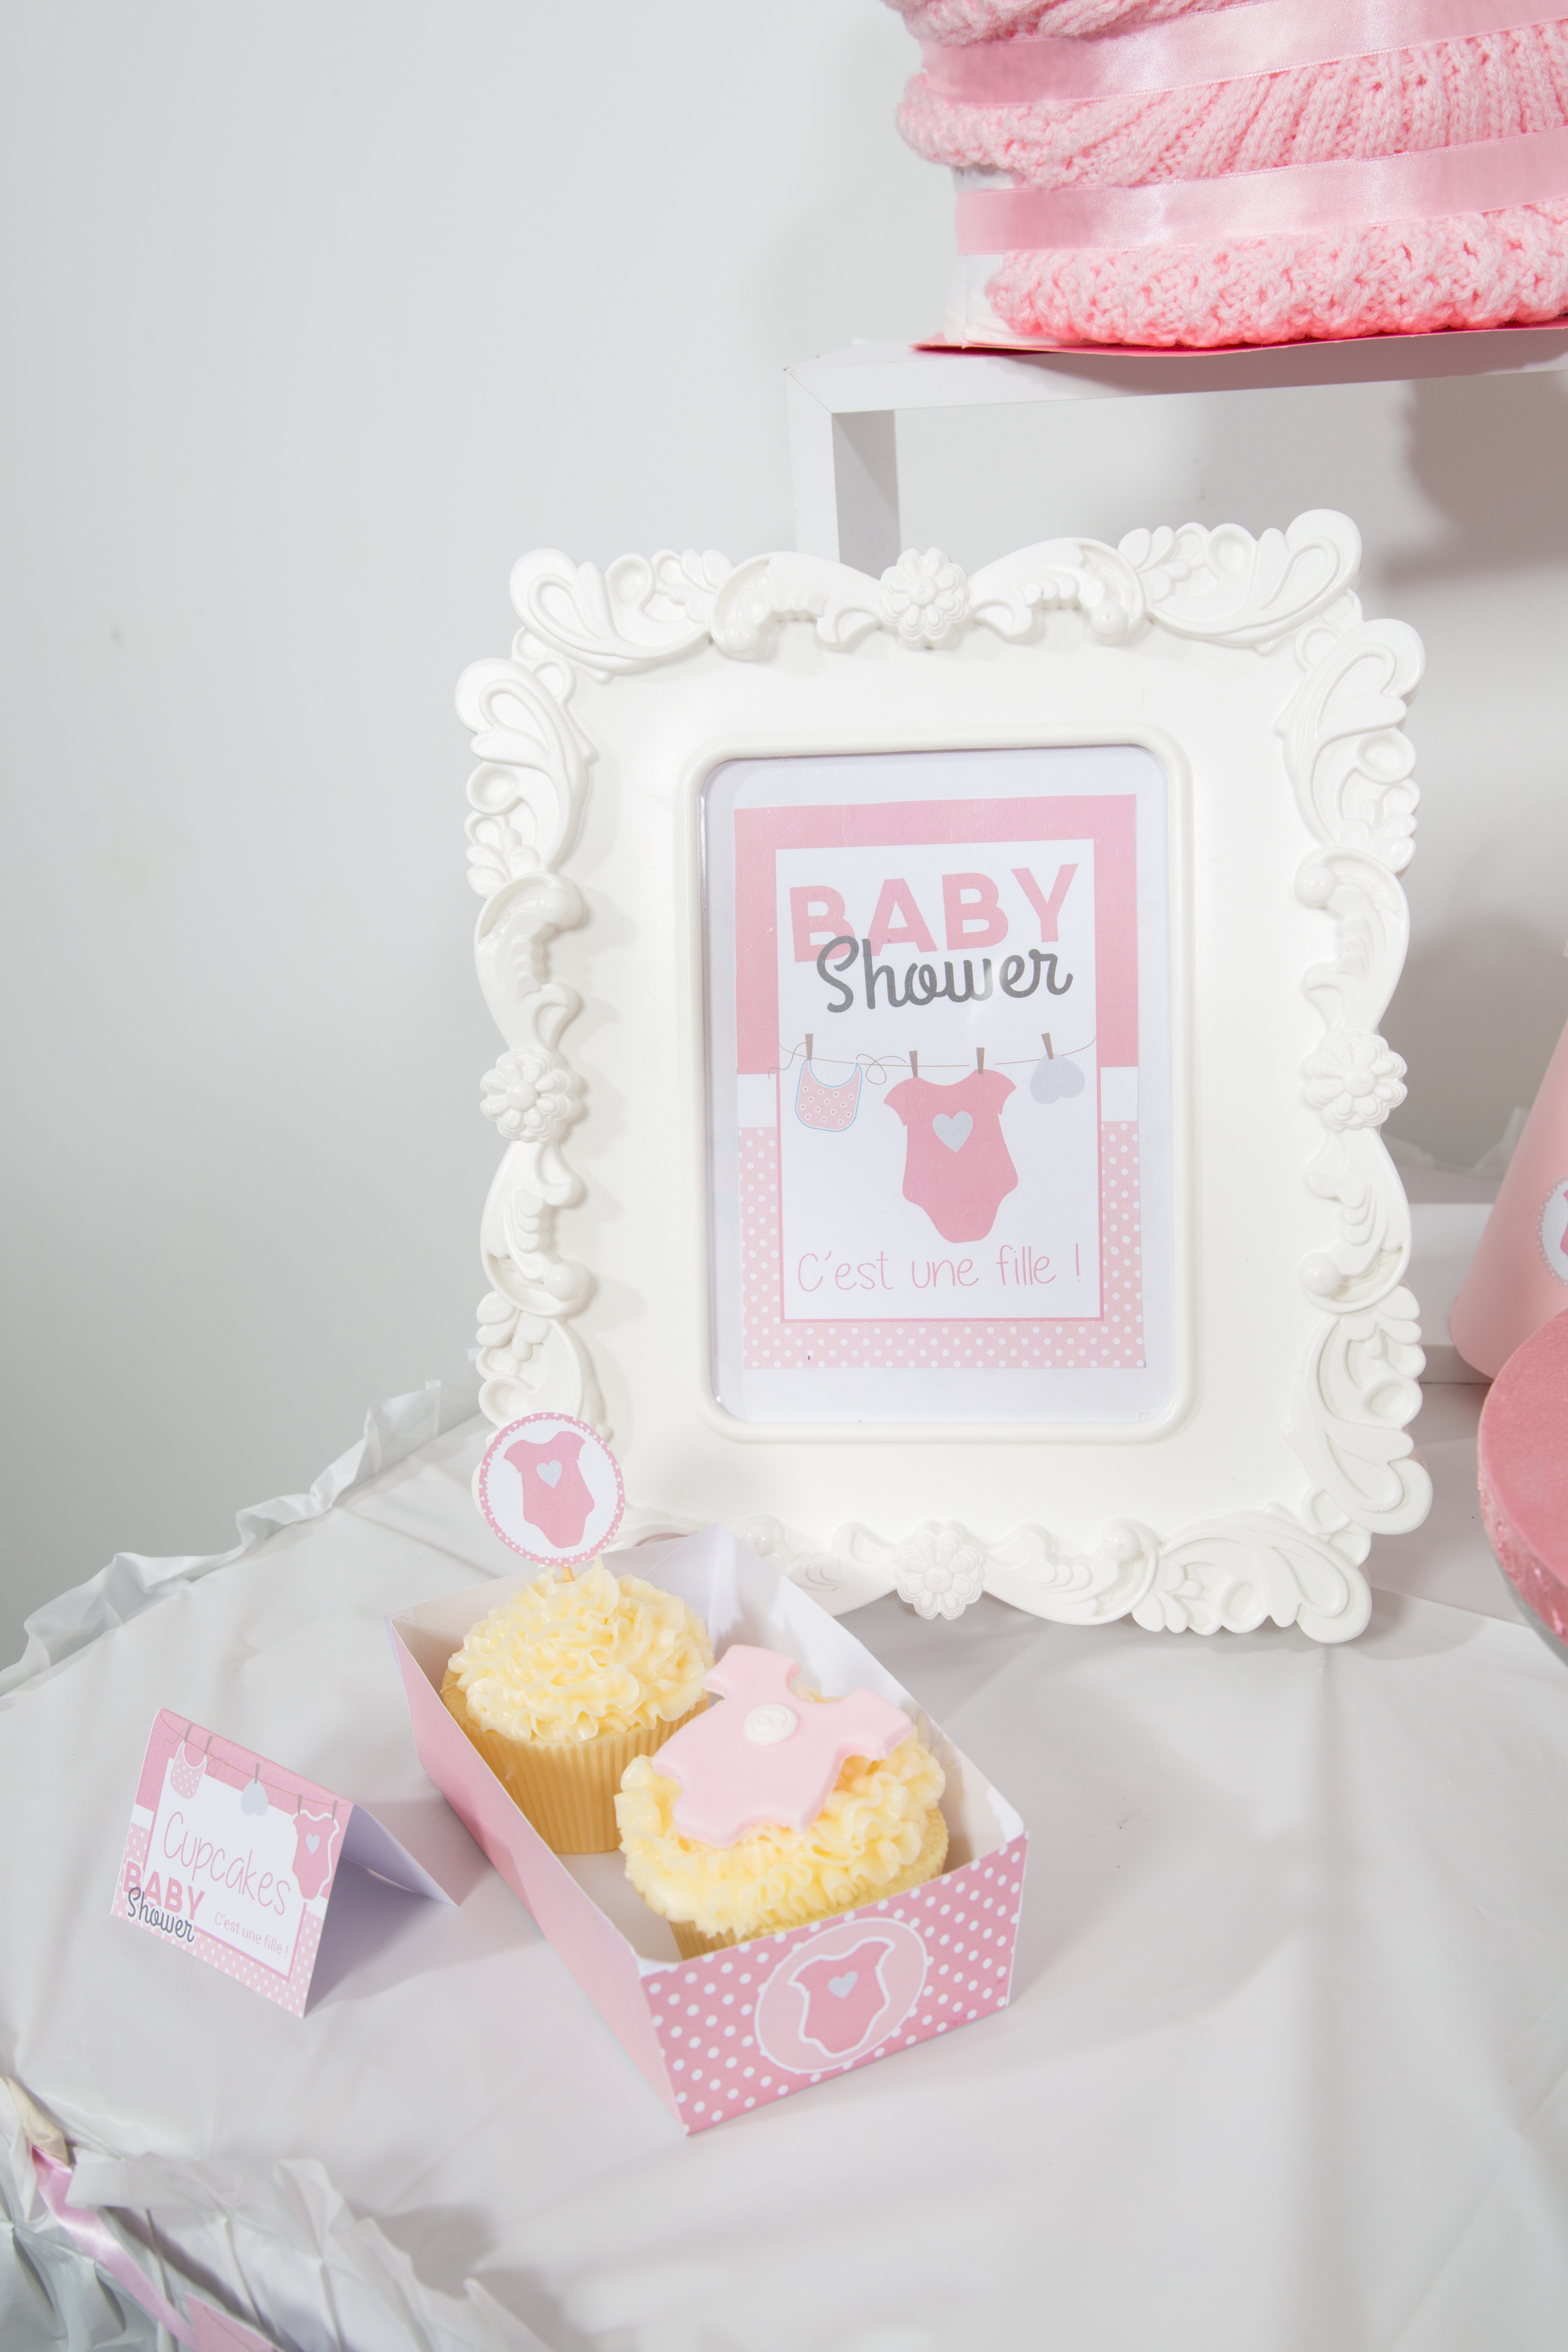 Shooting baby shower